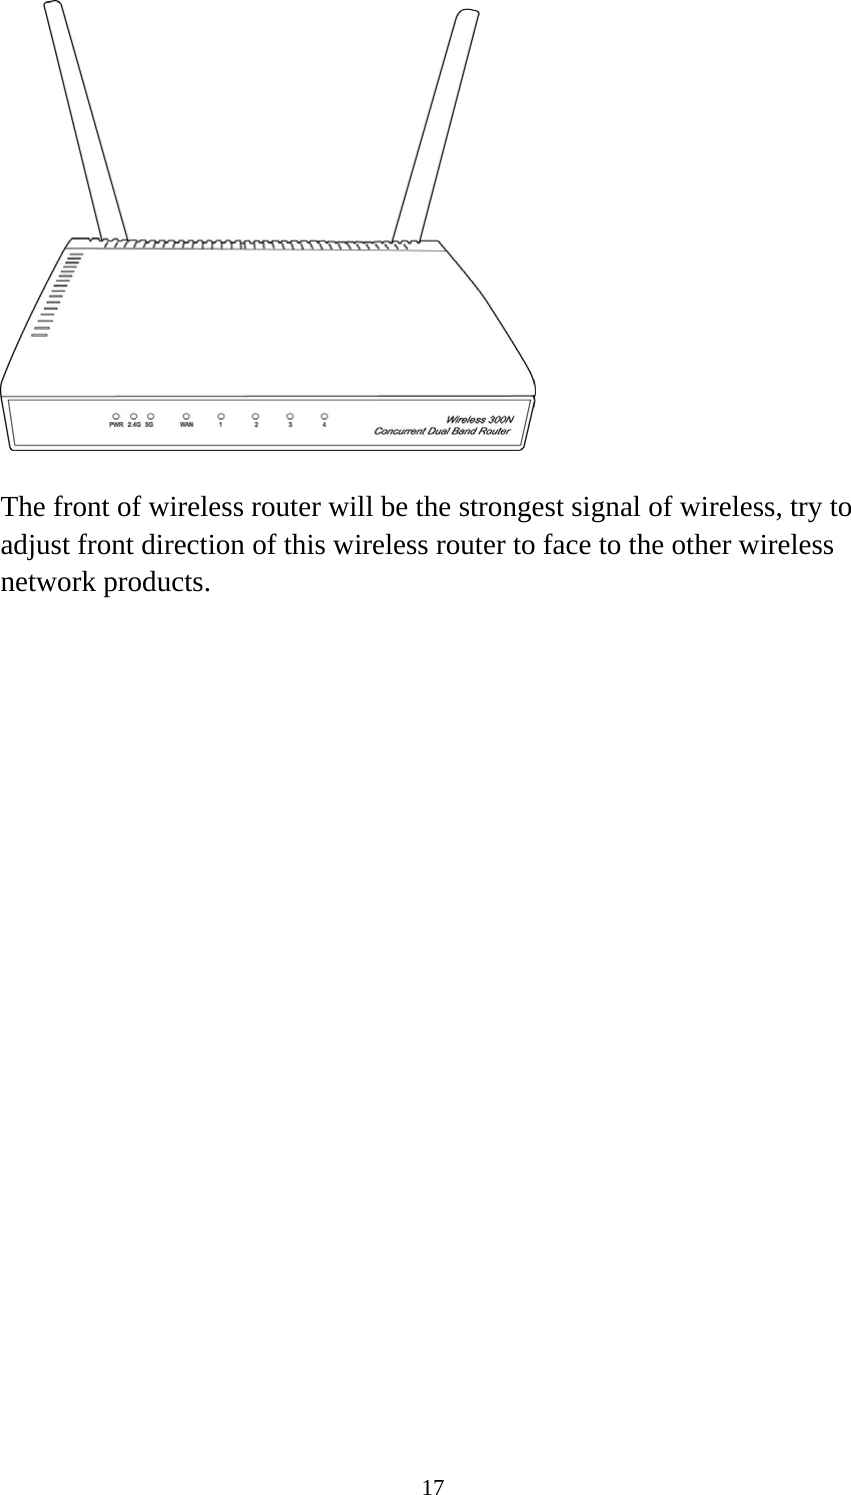 17   The front of wireless router will be the strongest signal of wireless, try to adjust front direction of this wireless router to face to the other wireless network products.   